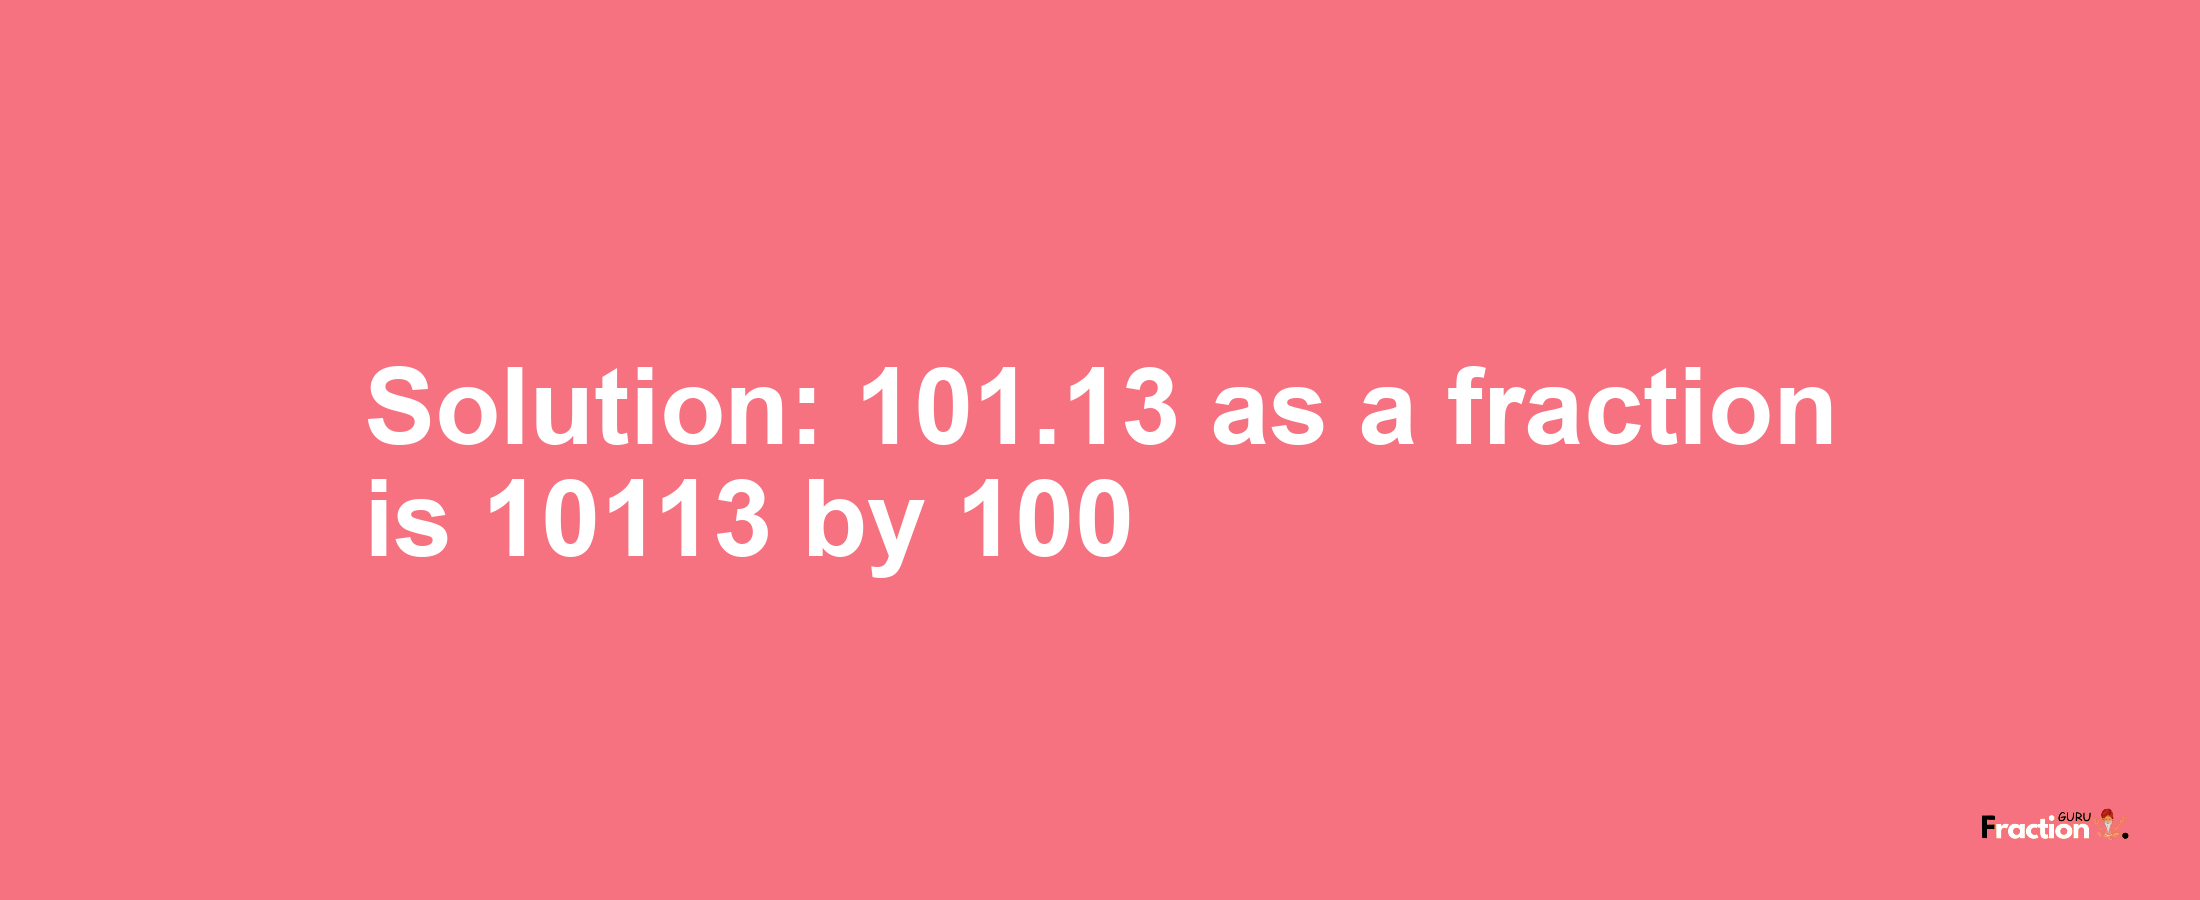 Solution:101.13 as a fraction is 10113/100